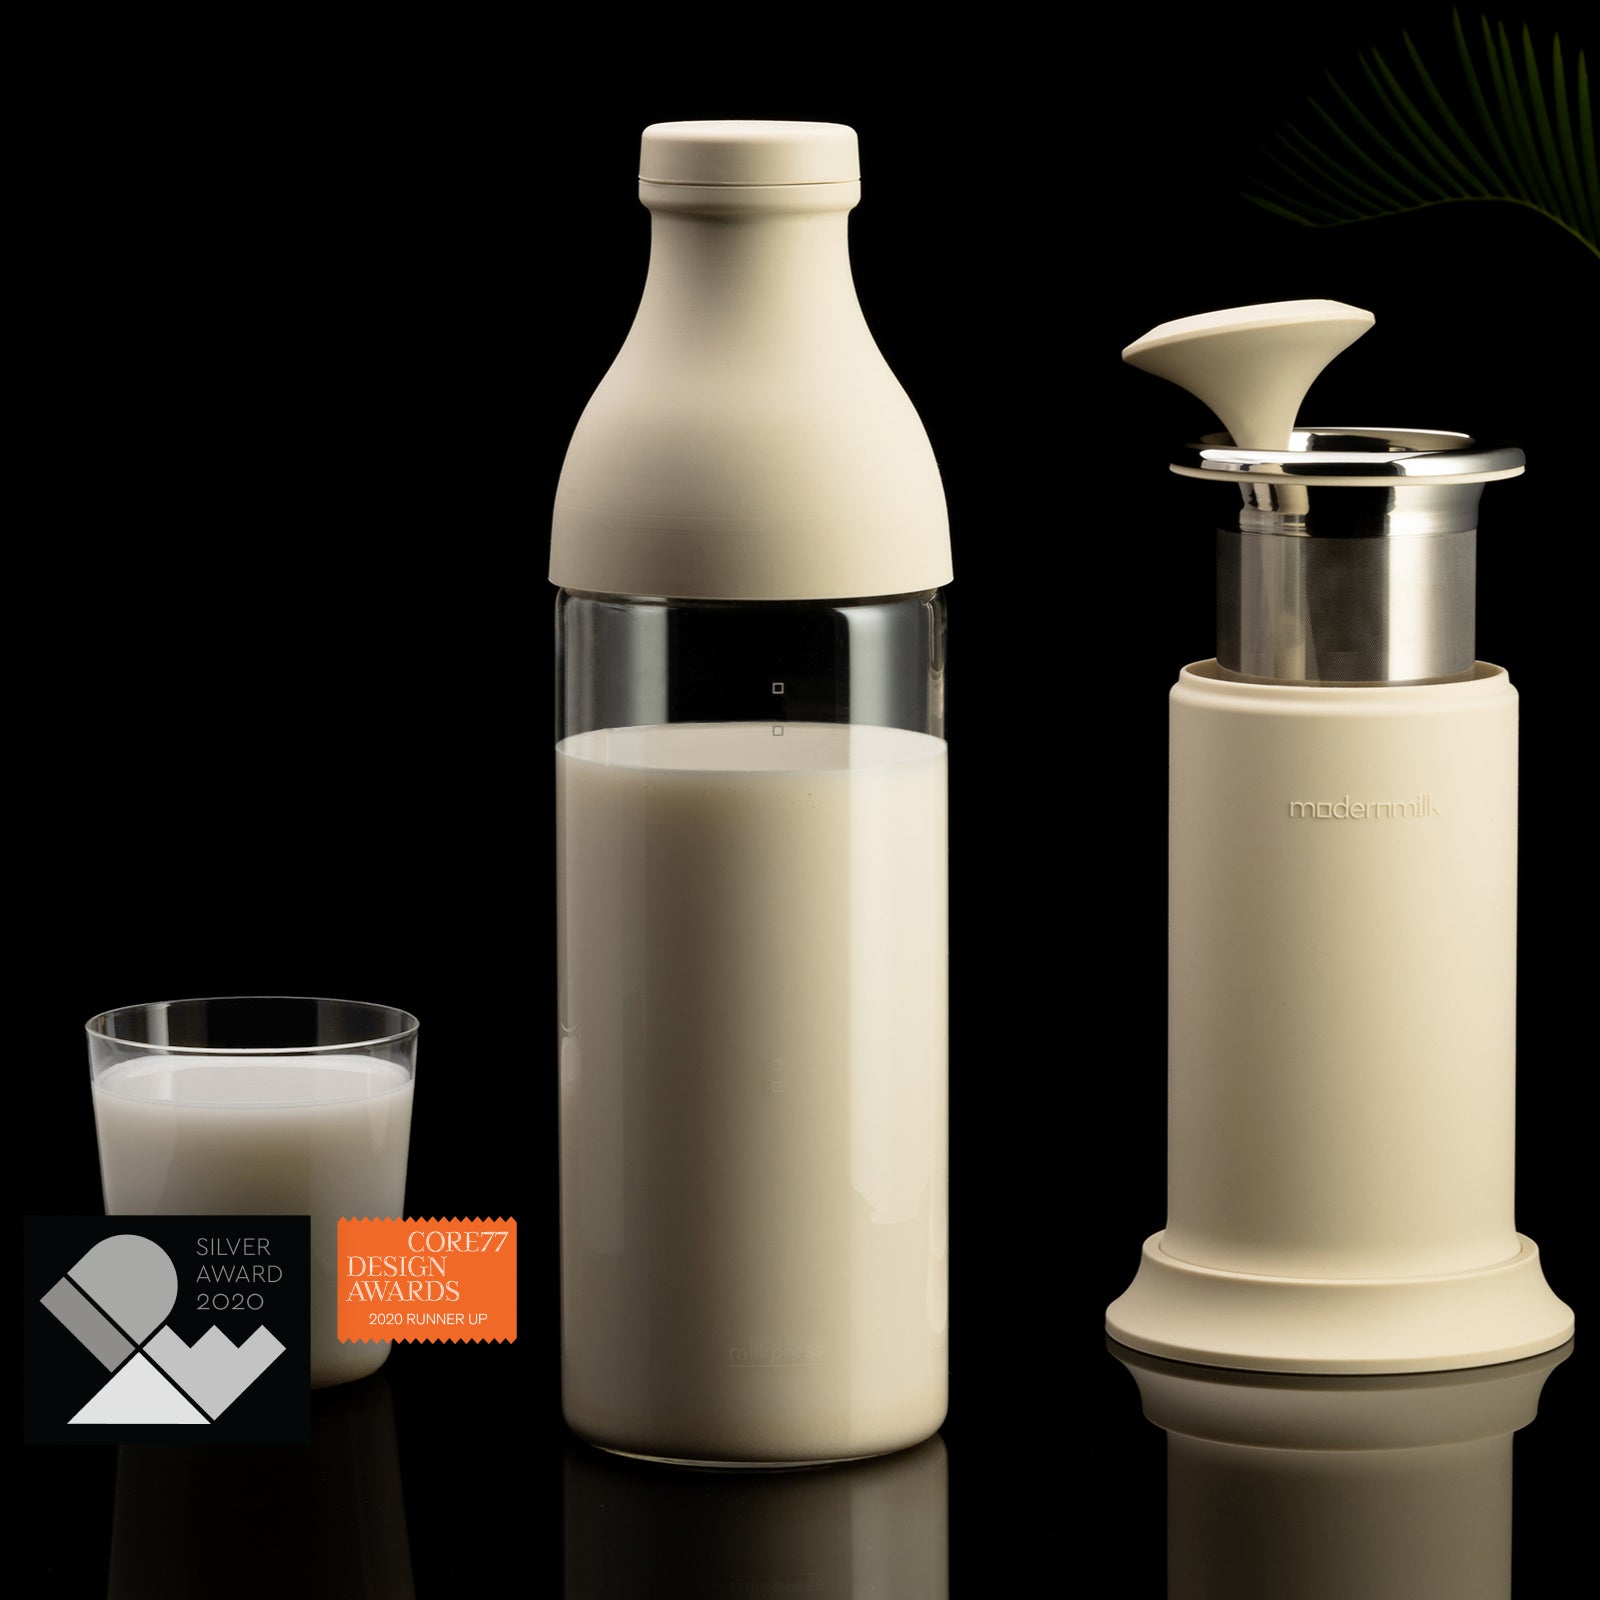 A stylish photo of the cream-colored milkpress bottle full of creamy plant-based milk. It’s next to a glass of plant-based milk as well as the milkpress parts neatly compacted for storage.